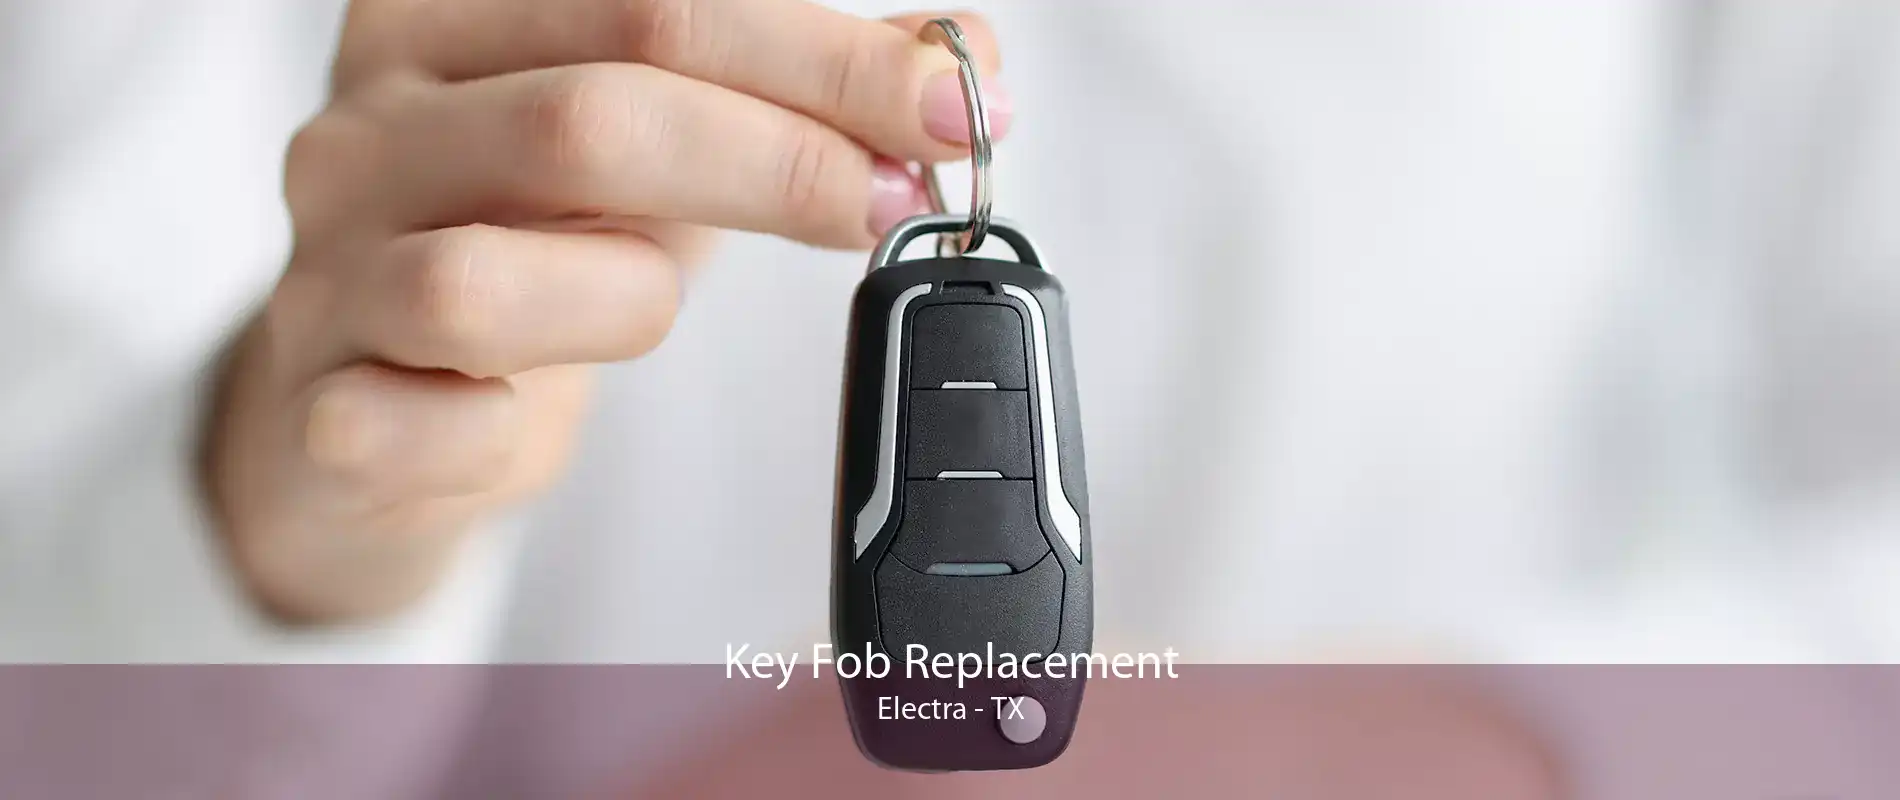 Key Fob Replacement Electra - TX